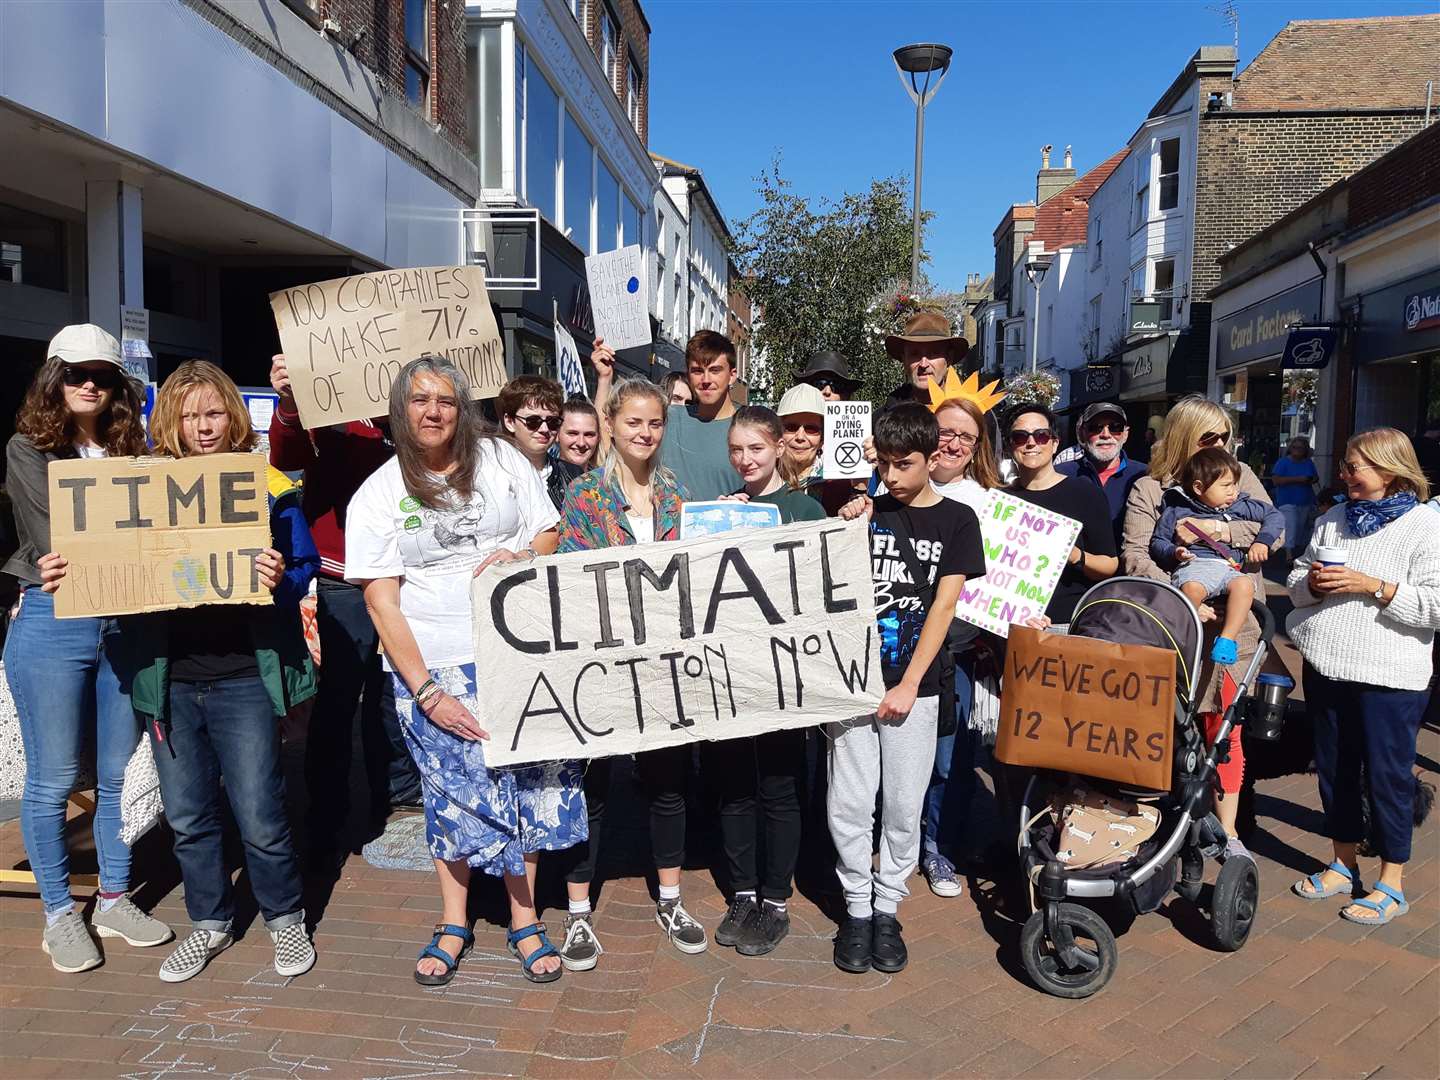 You Strike 4 Change and East Kent Climate Action joined together to hold the march in Deal High Street